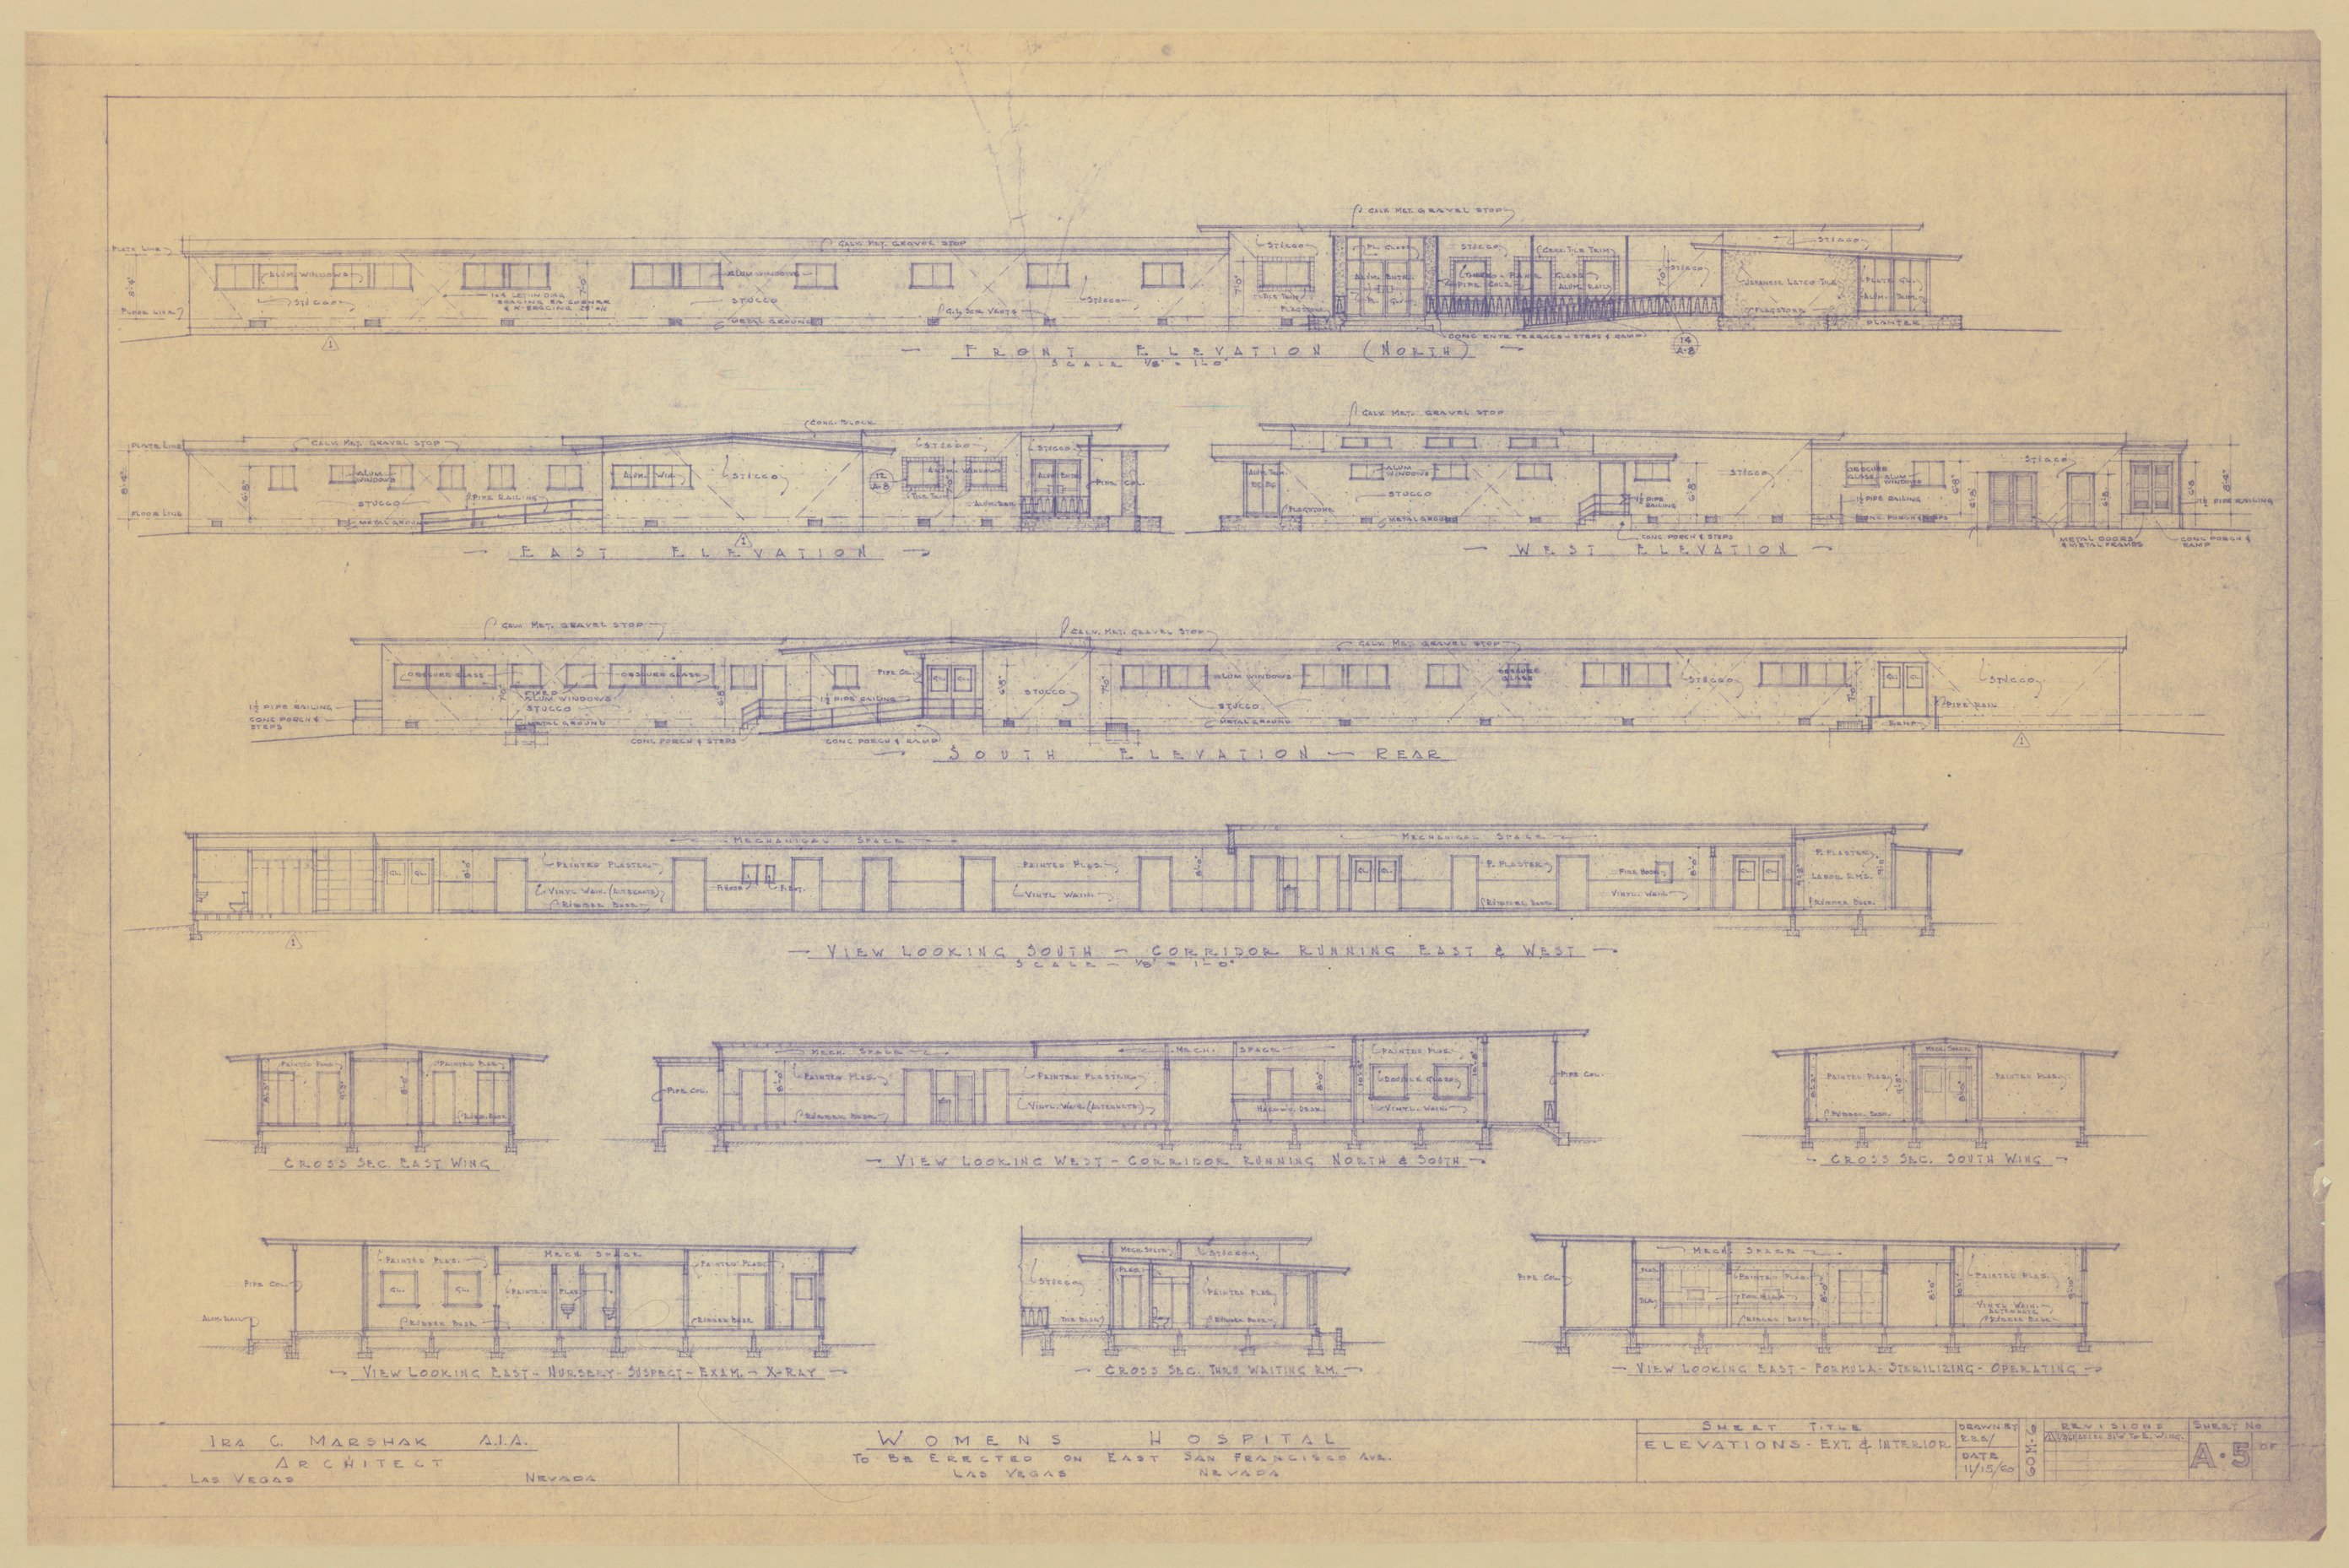 Women's Hospital: architectural, mechanical, electrical, plumbing drawings, image 003